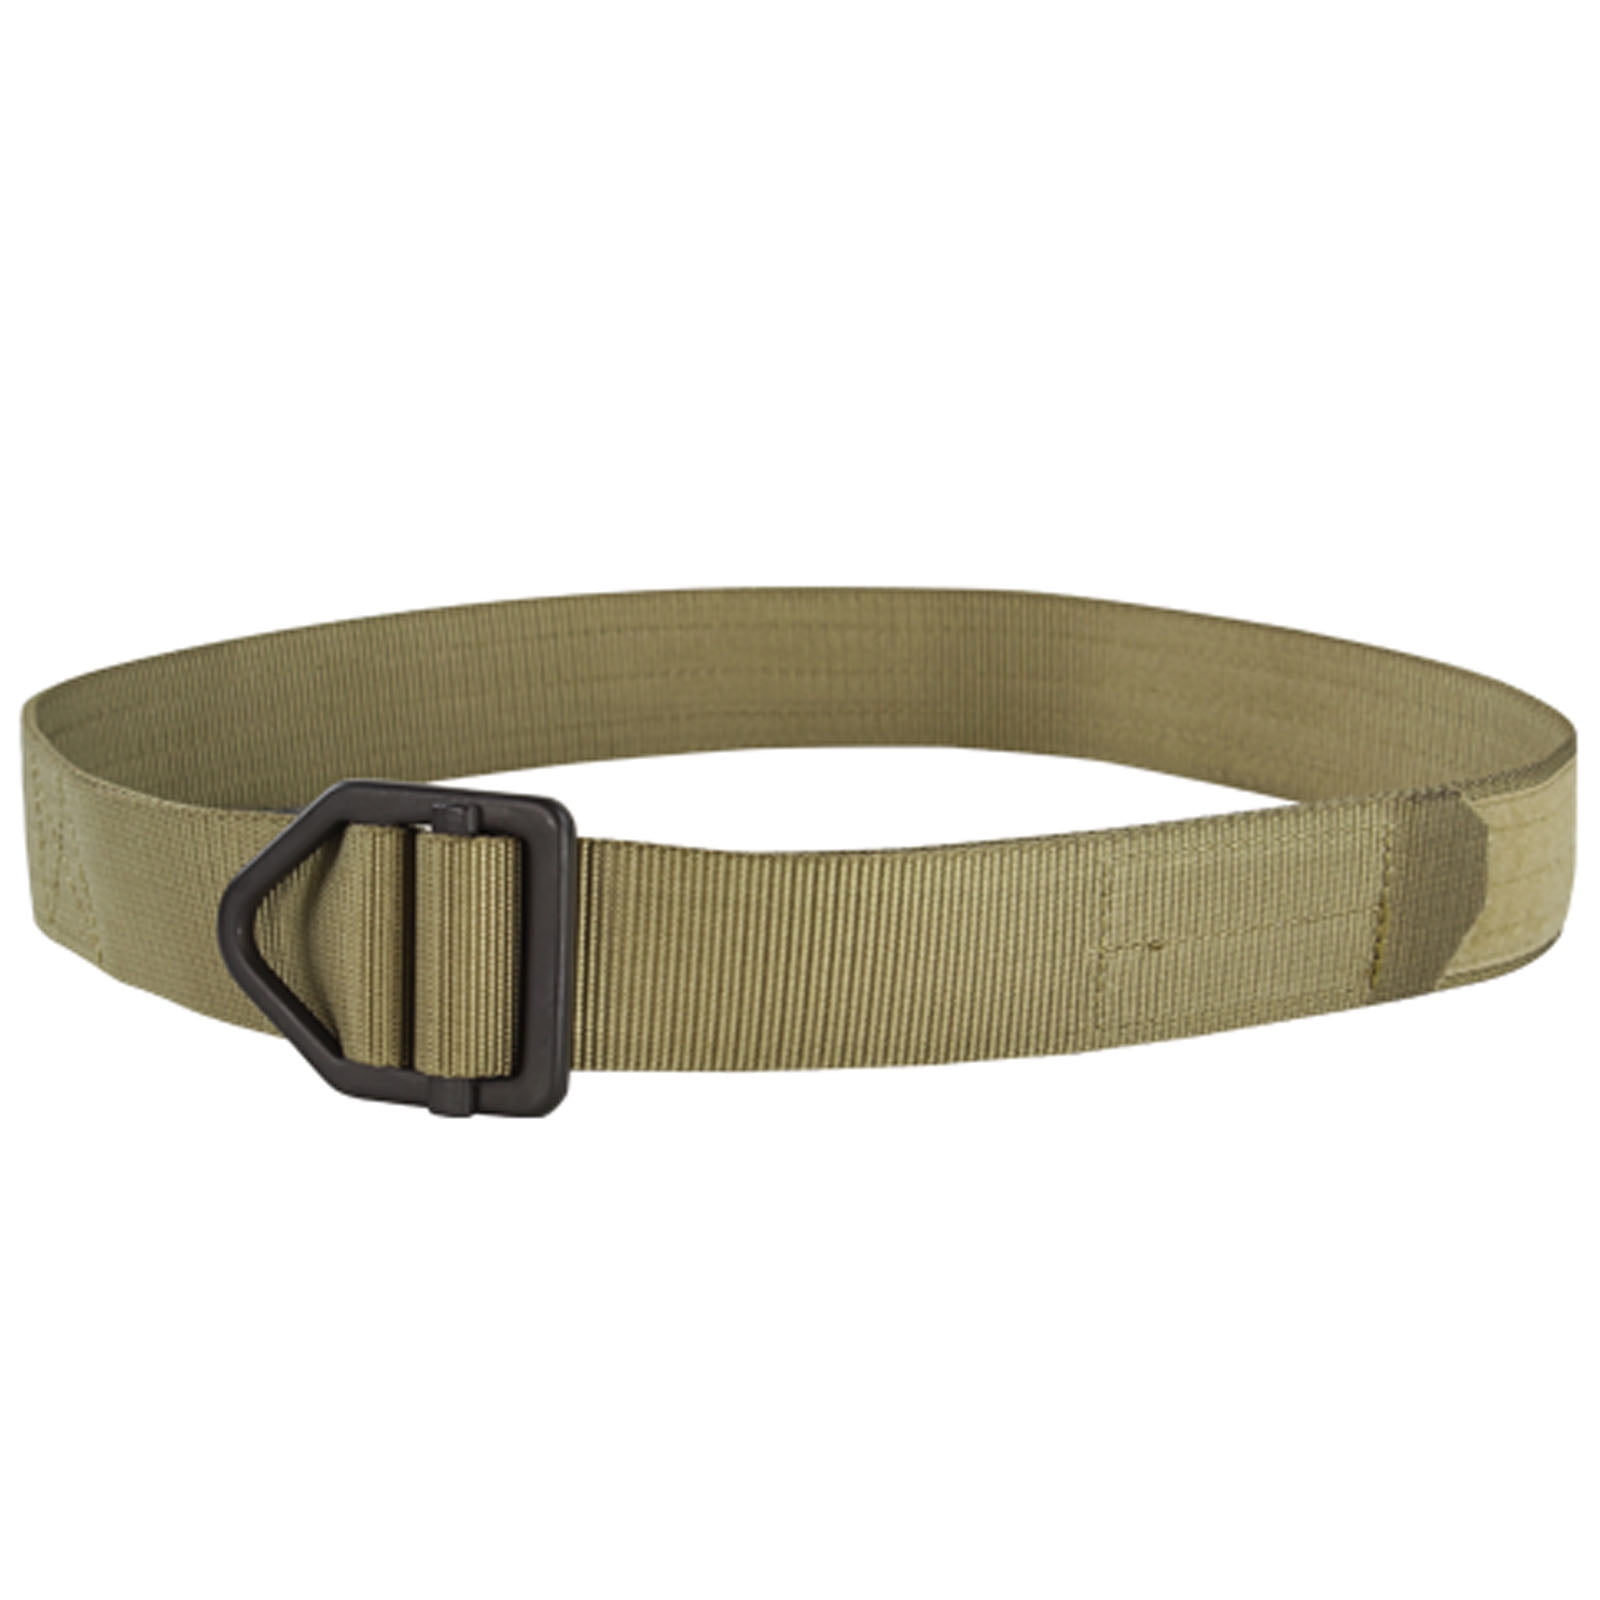 Condor RB Tactical Military Emergency Utility Duty Metal Buckle Rigger Belt S-XL 